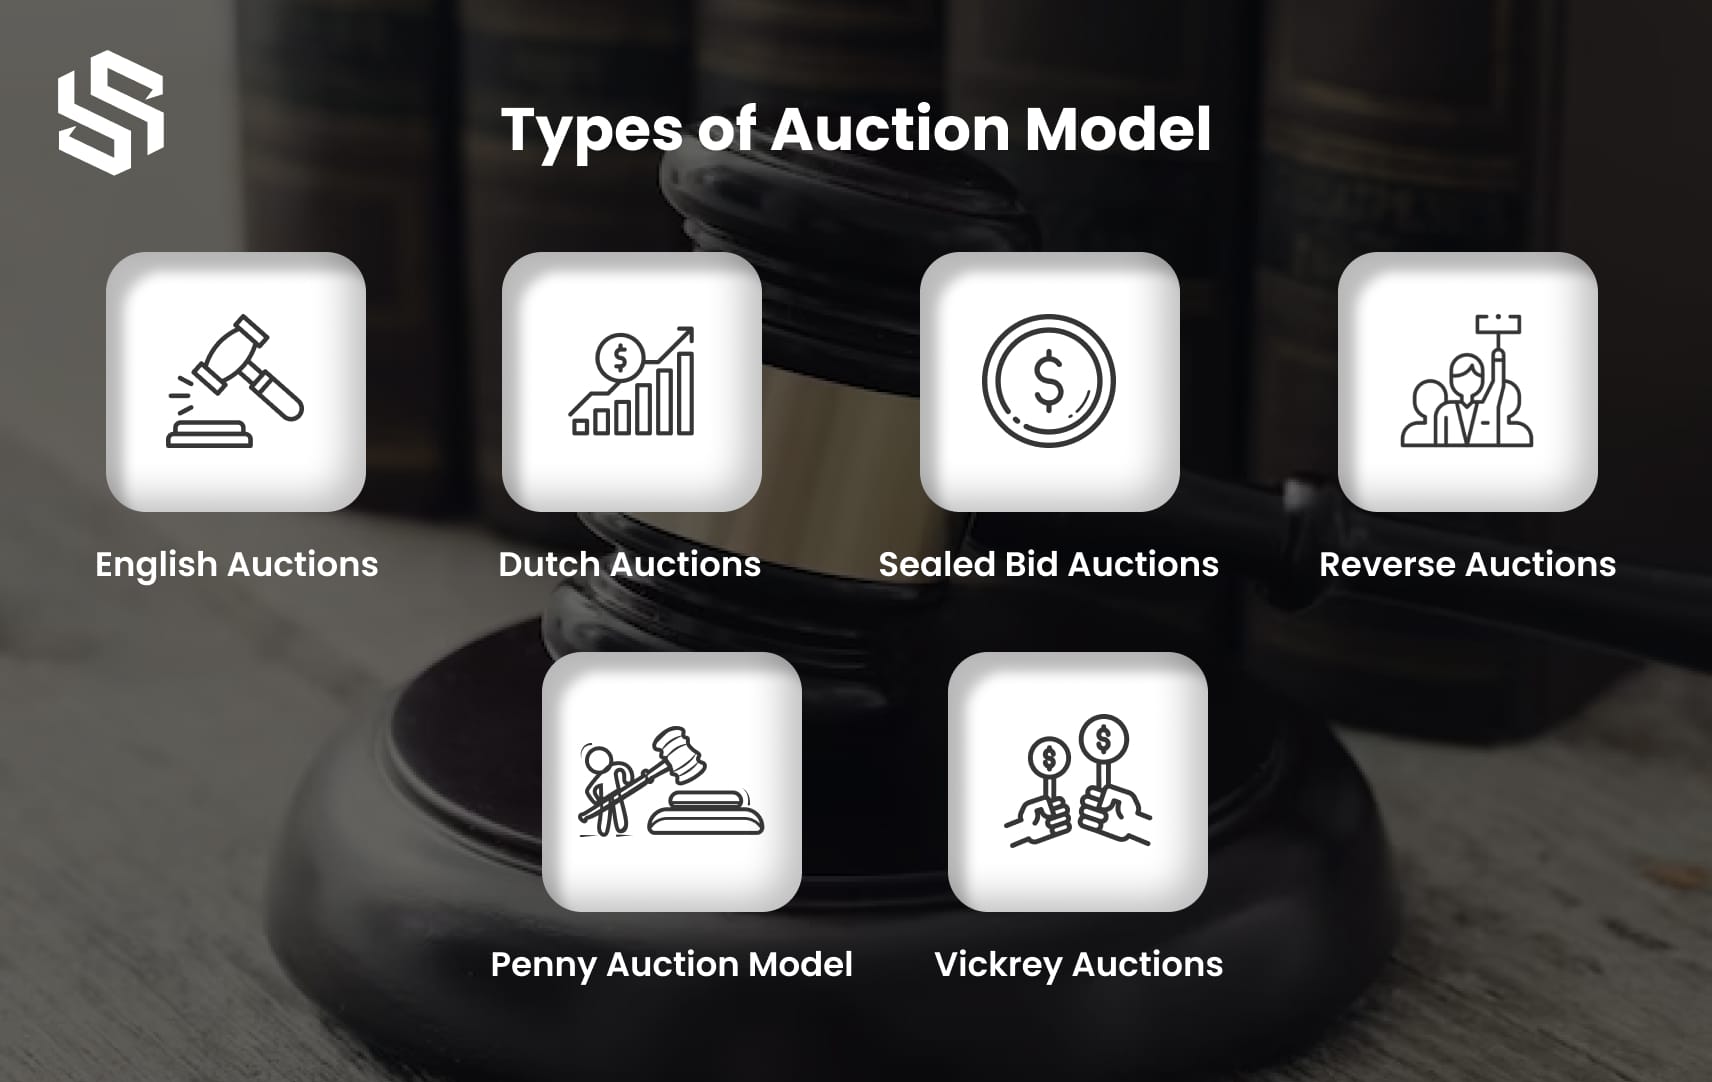 Types of Auction Model